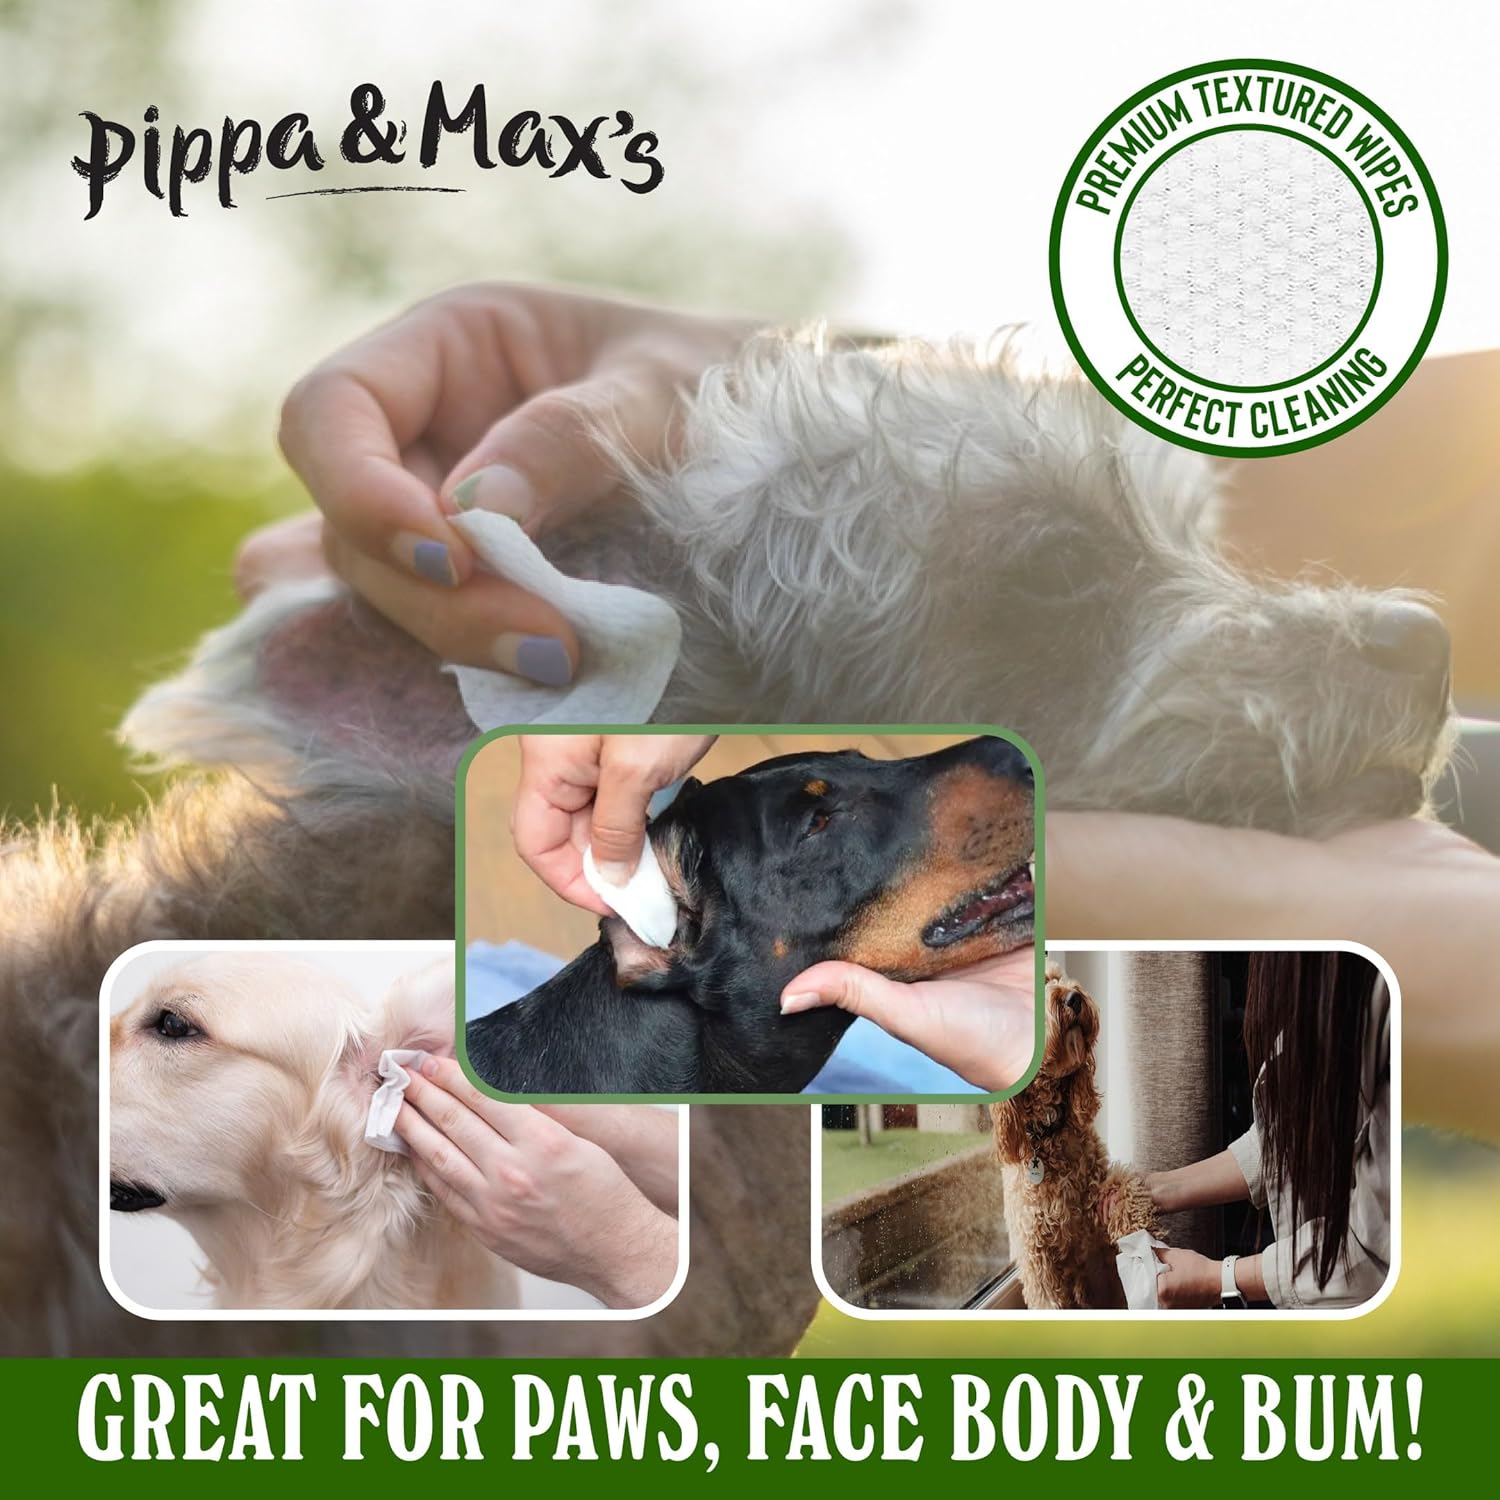 Pippa & Max Compostable Dog Wipes - Biodegradable Pet Wipes for Full Body, Eyes, Ears, Bum & Paws - 200 Sensitive Grooming Wipes for Dogs, Puppies & Cats (Fragrance-Free)